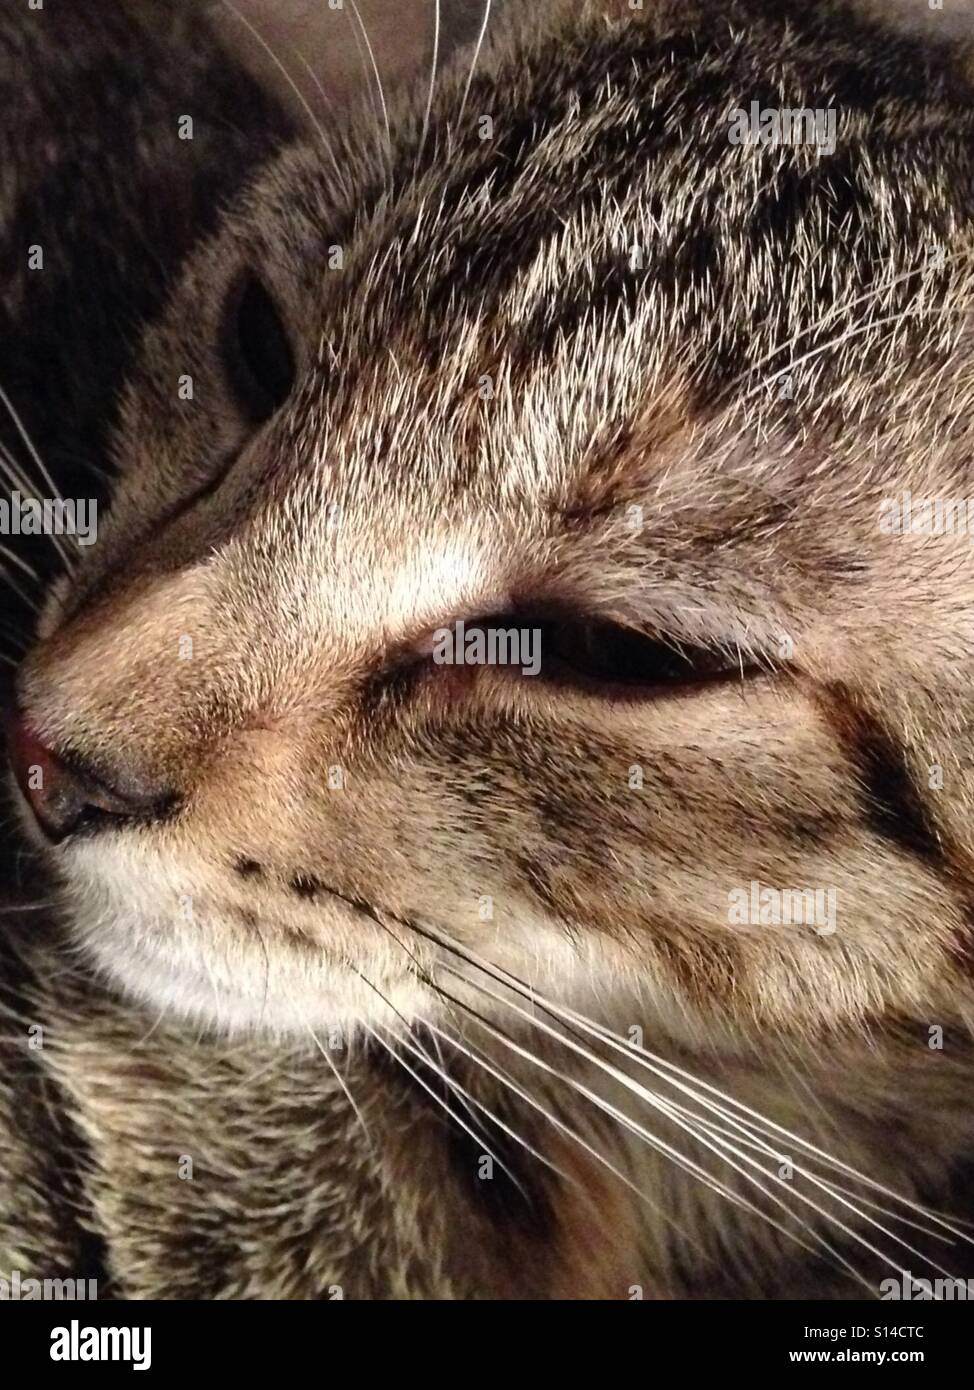 Extreme close up portrait of tabby kitten Stock Photo